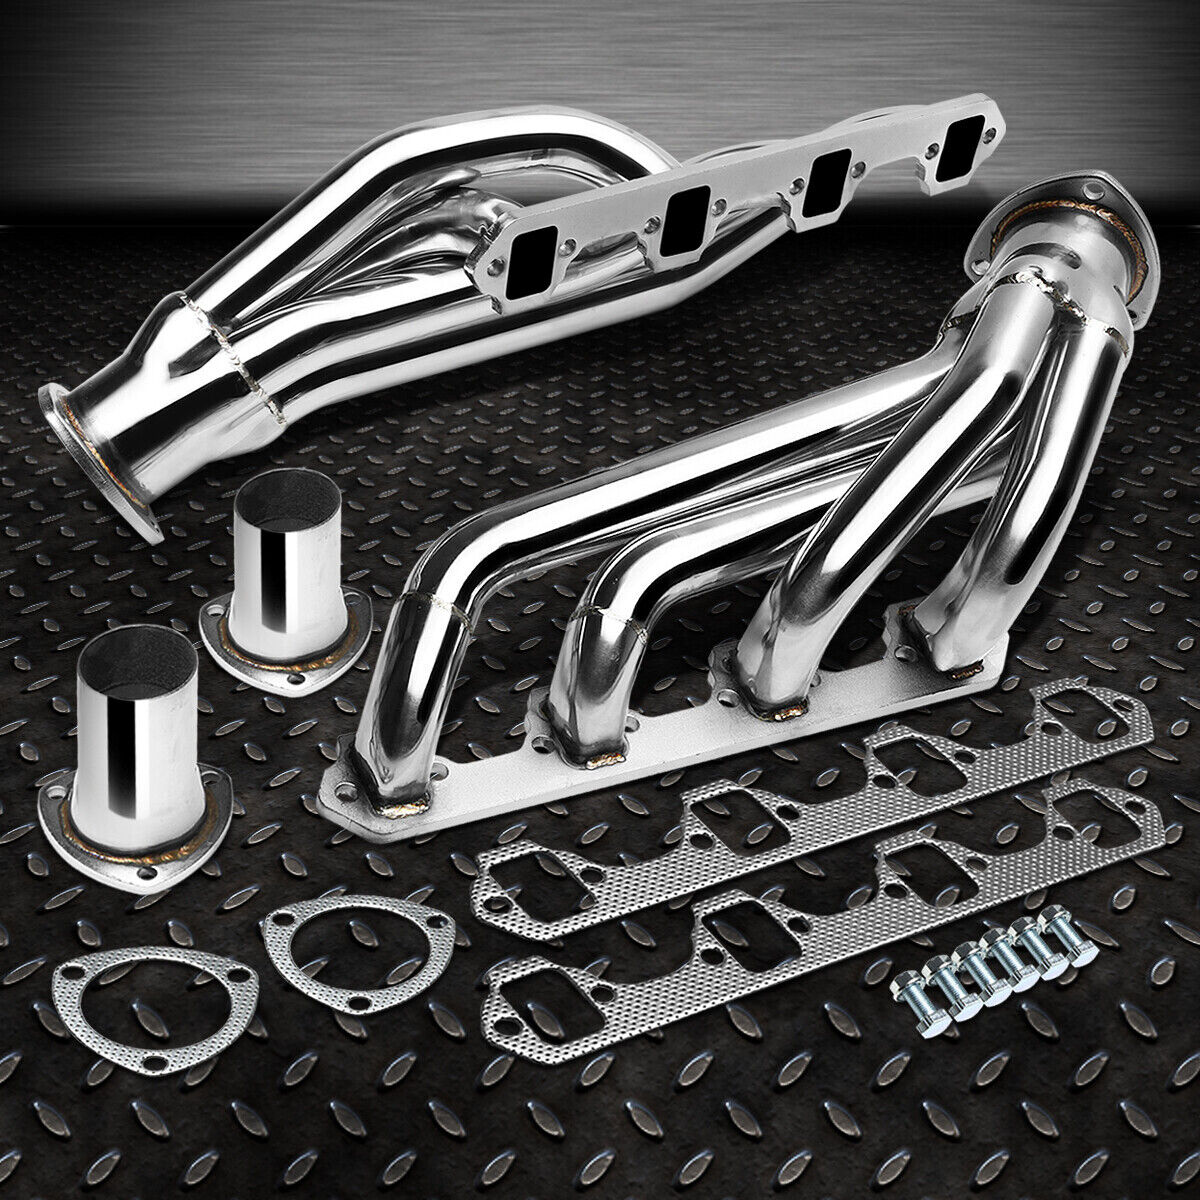 Stainless Tubular Manifold Header Exhaust For 63-77 Ford Mustang/Cougar V8 5.0